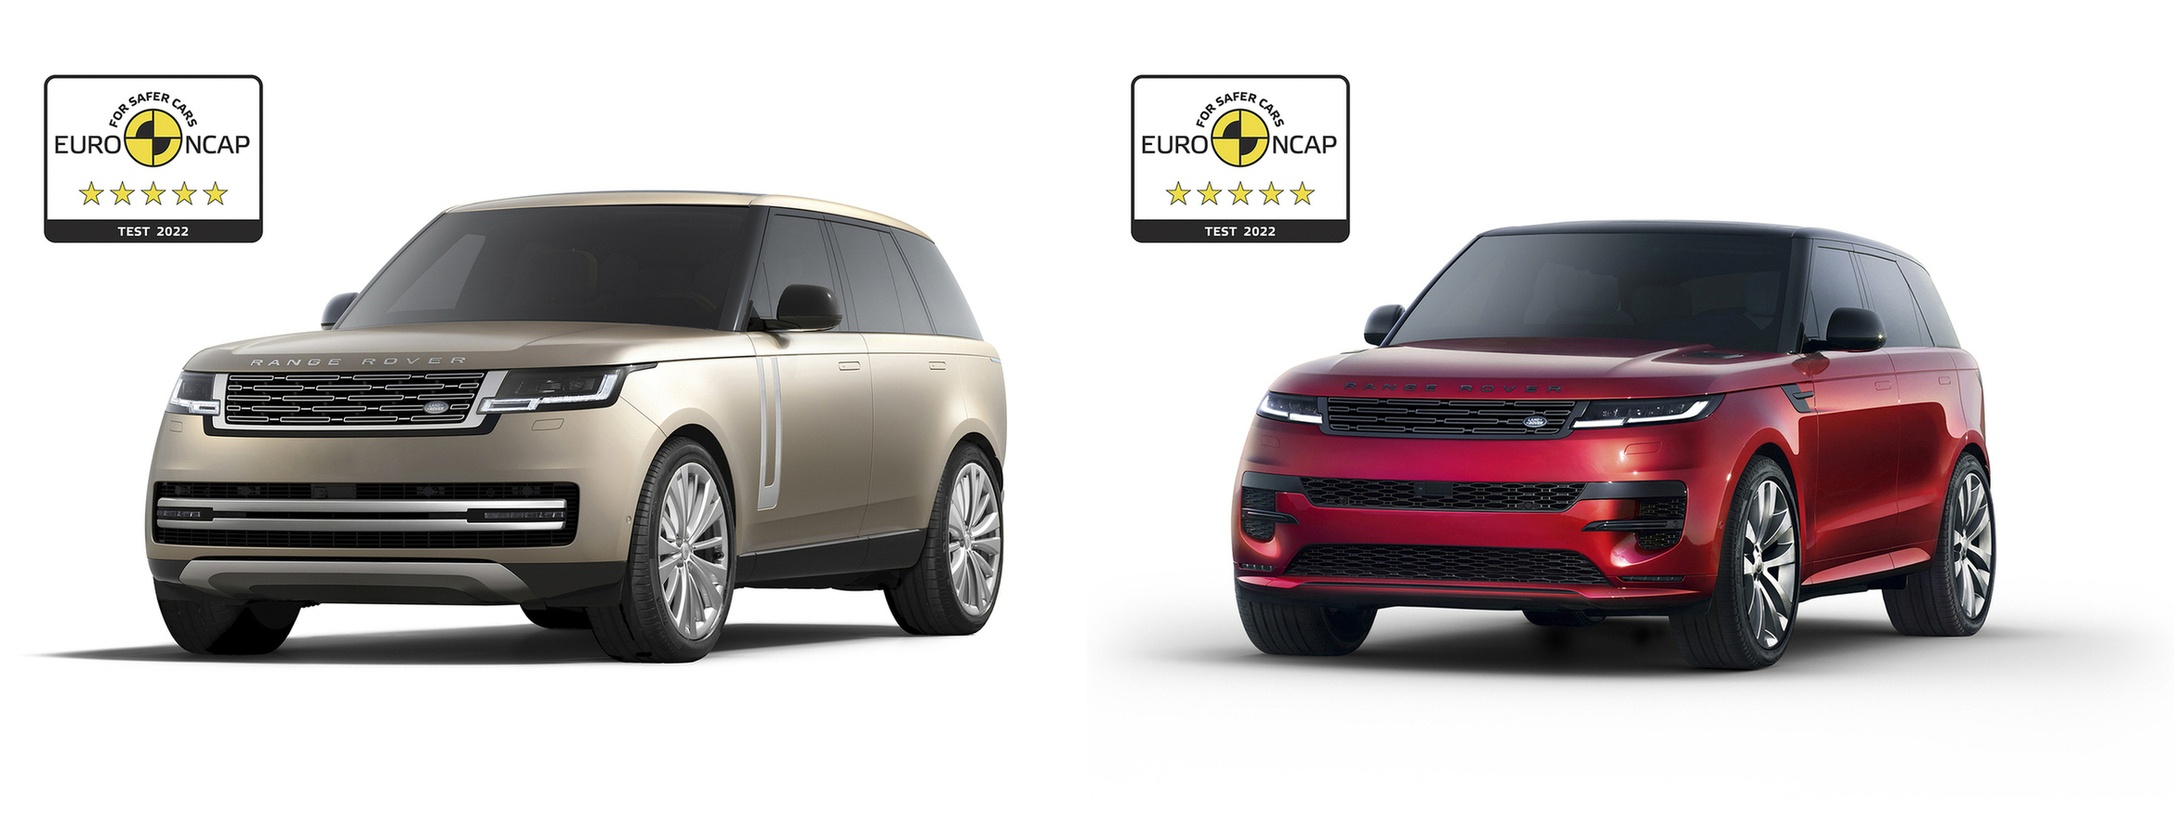 RANGE ROVER AND RANGE ROVER SPORT AWARDED FIVE-STAR  EURO NCAP SAFETY RATINGS